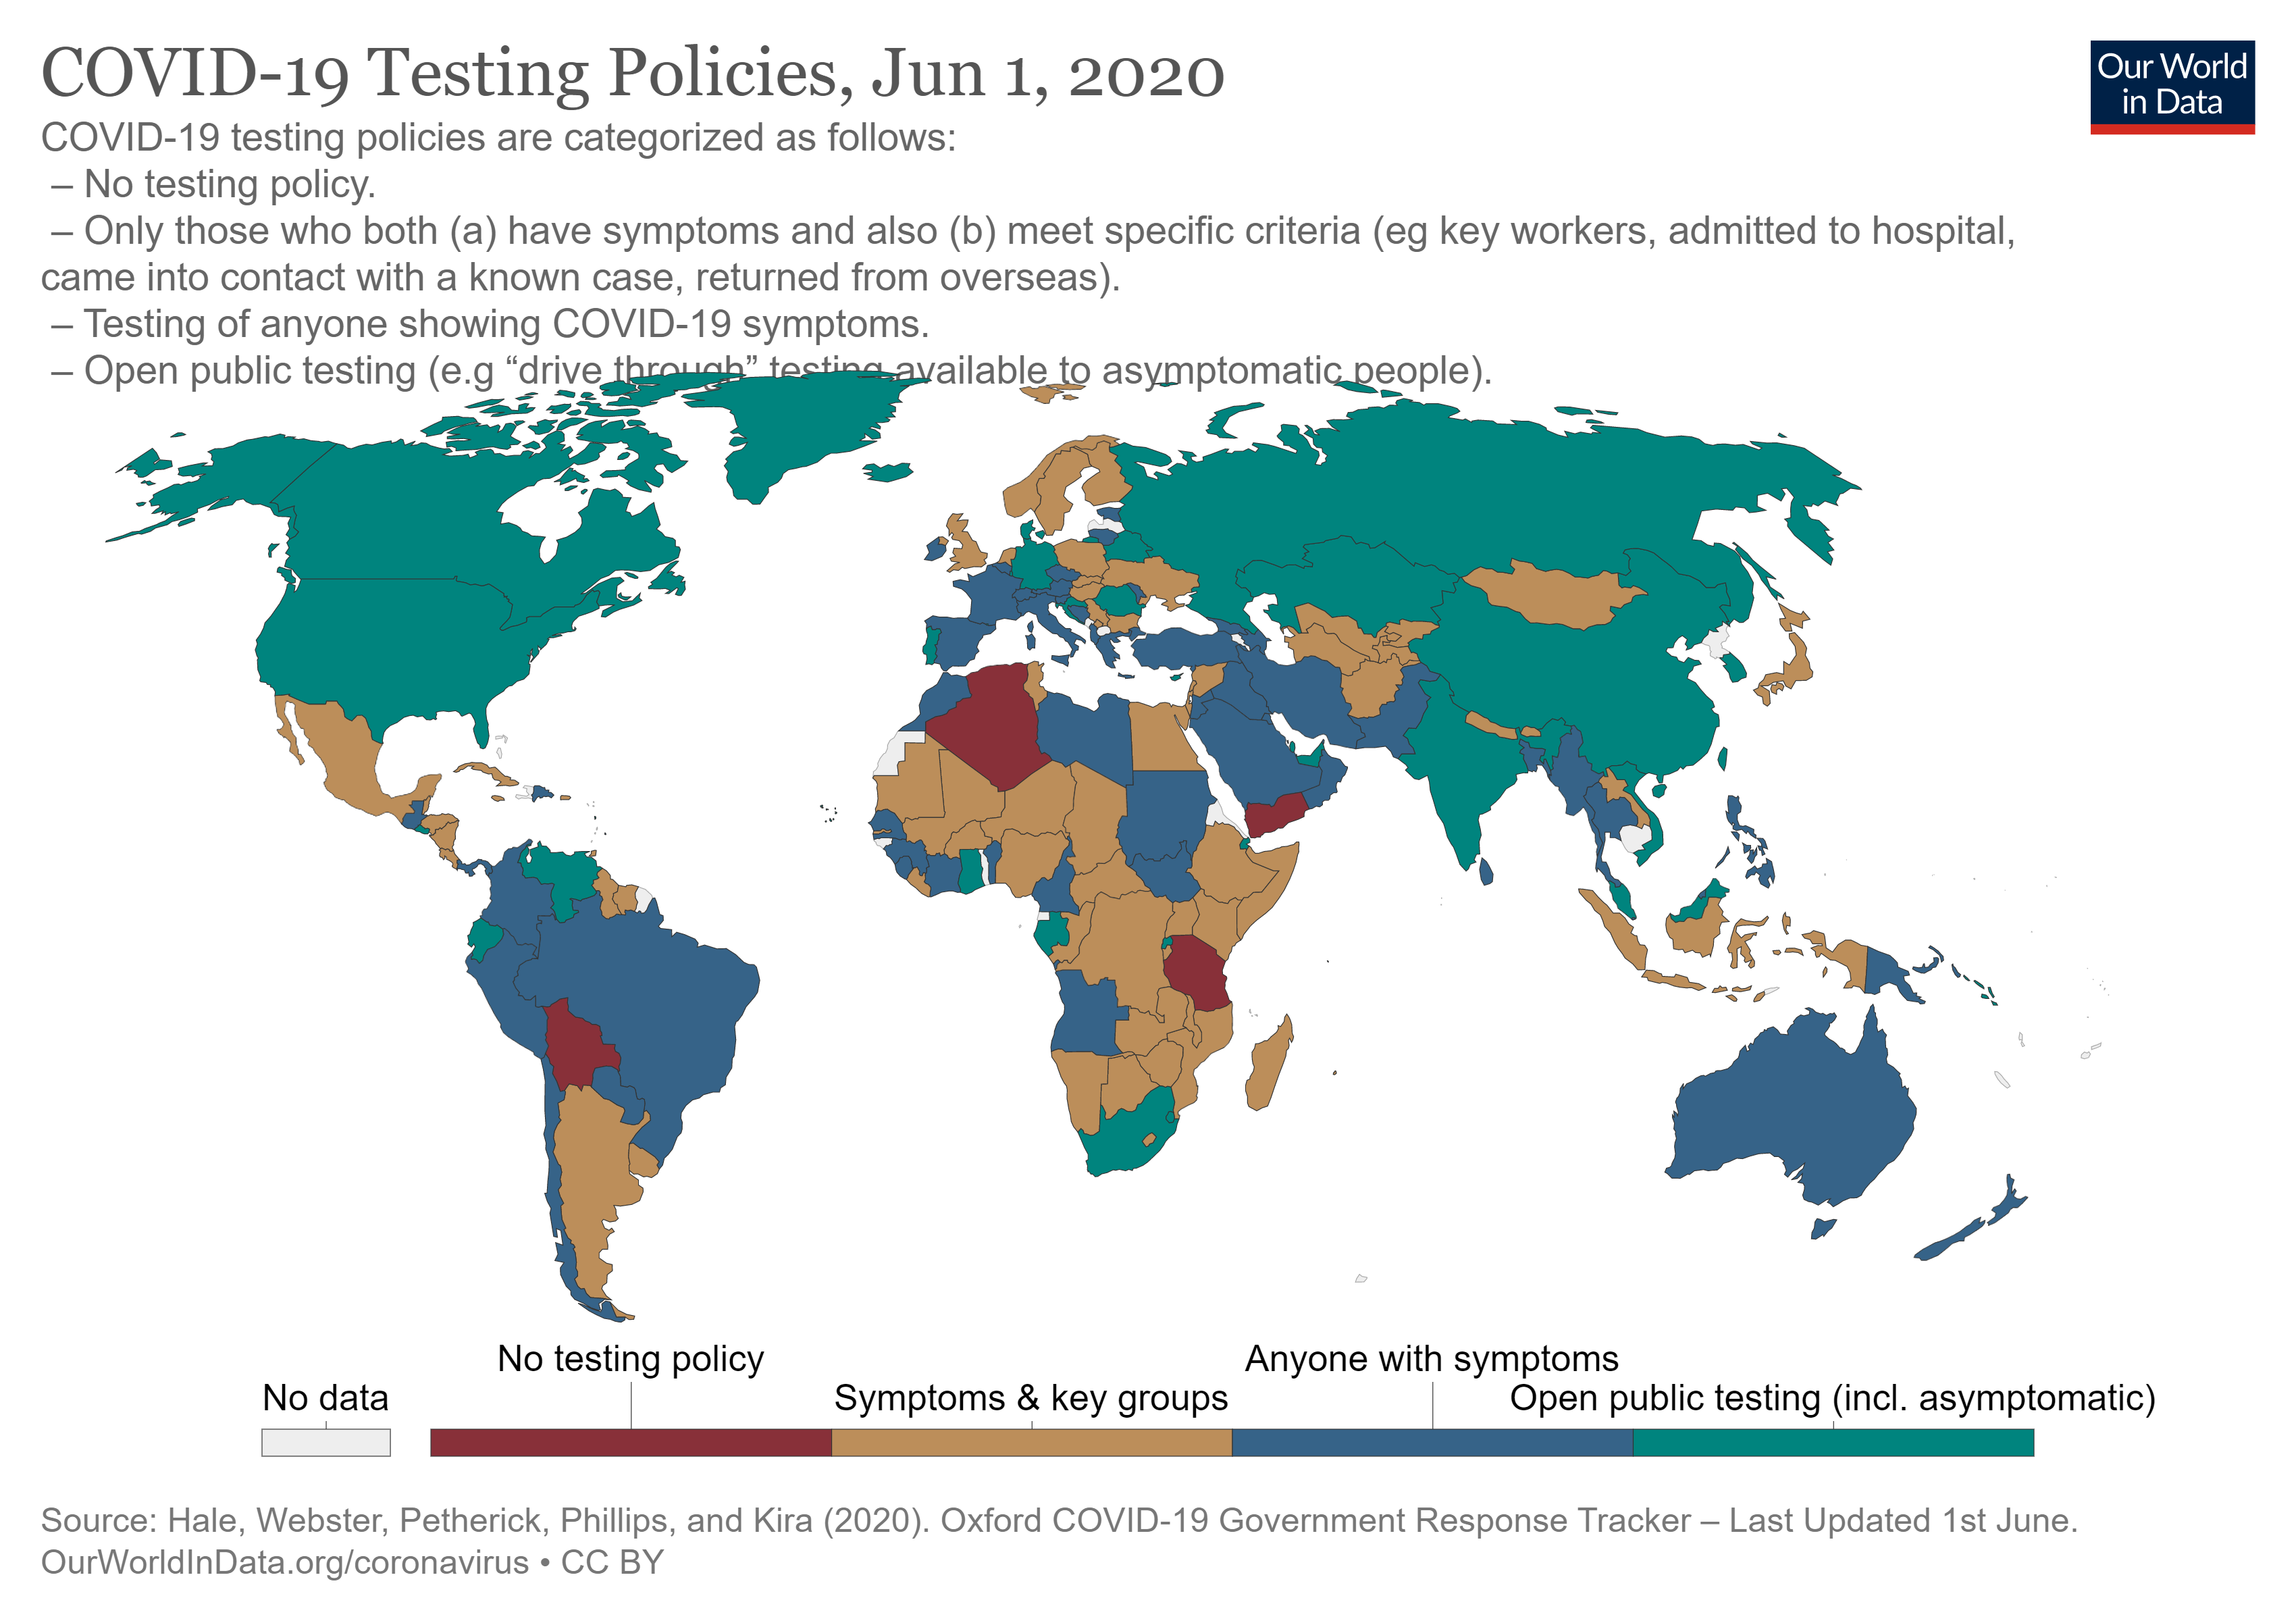 Figure 16: Covid-19 Testing Policies at 1 June